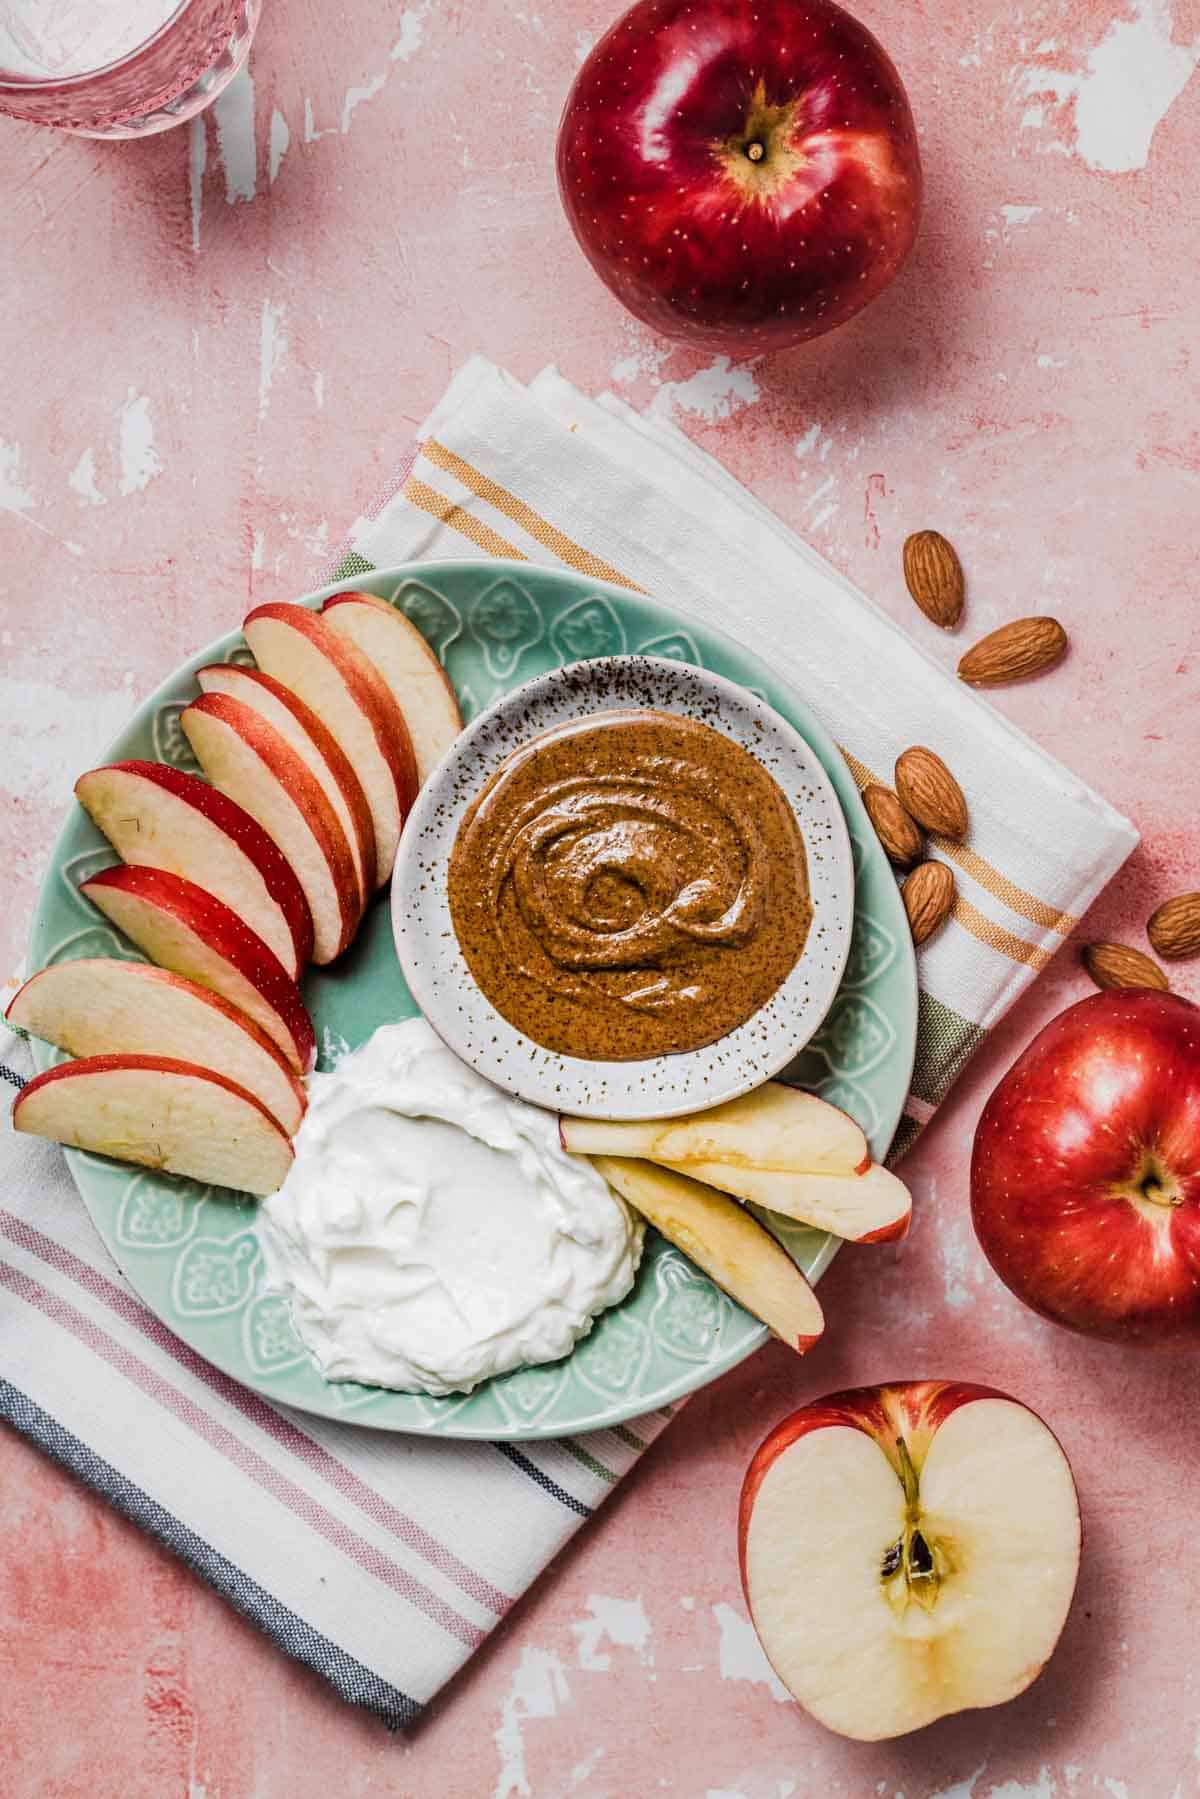 Birds eye view of sliced apple with almond butter and Greek yogurt dip on the side.